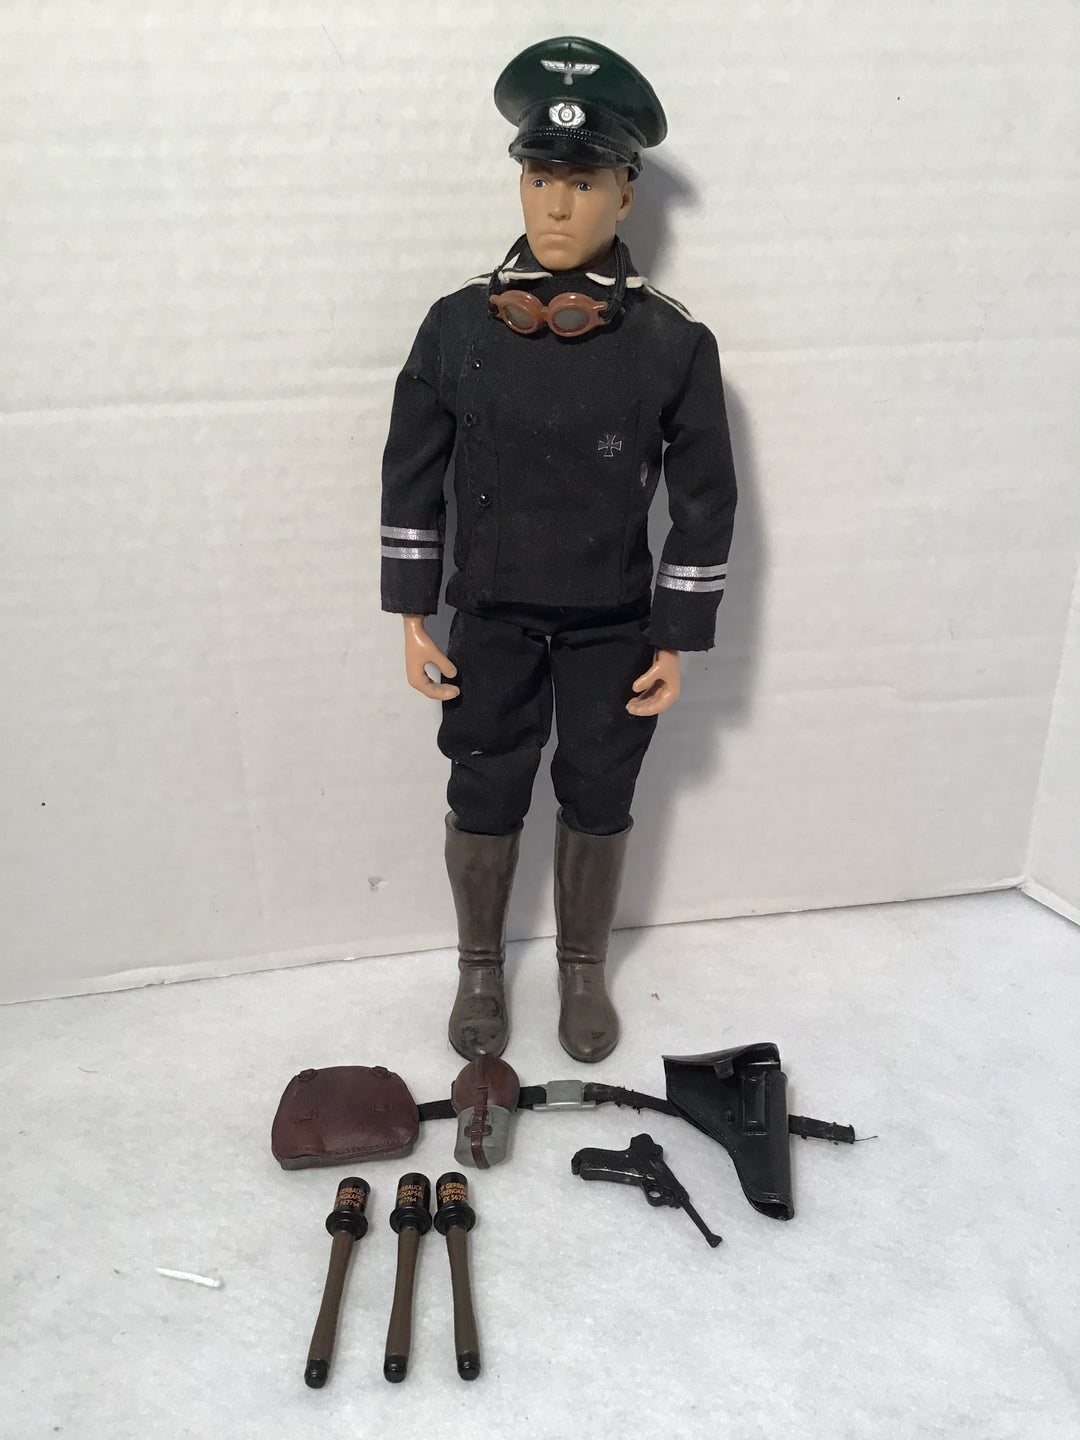 GI Joe Foreign Soldiers Collection:WWII German Panzer Tank Sgt Major Almost Complete Hasbro 2000